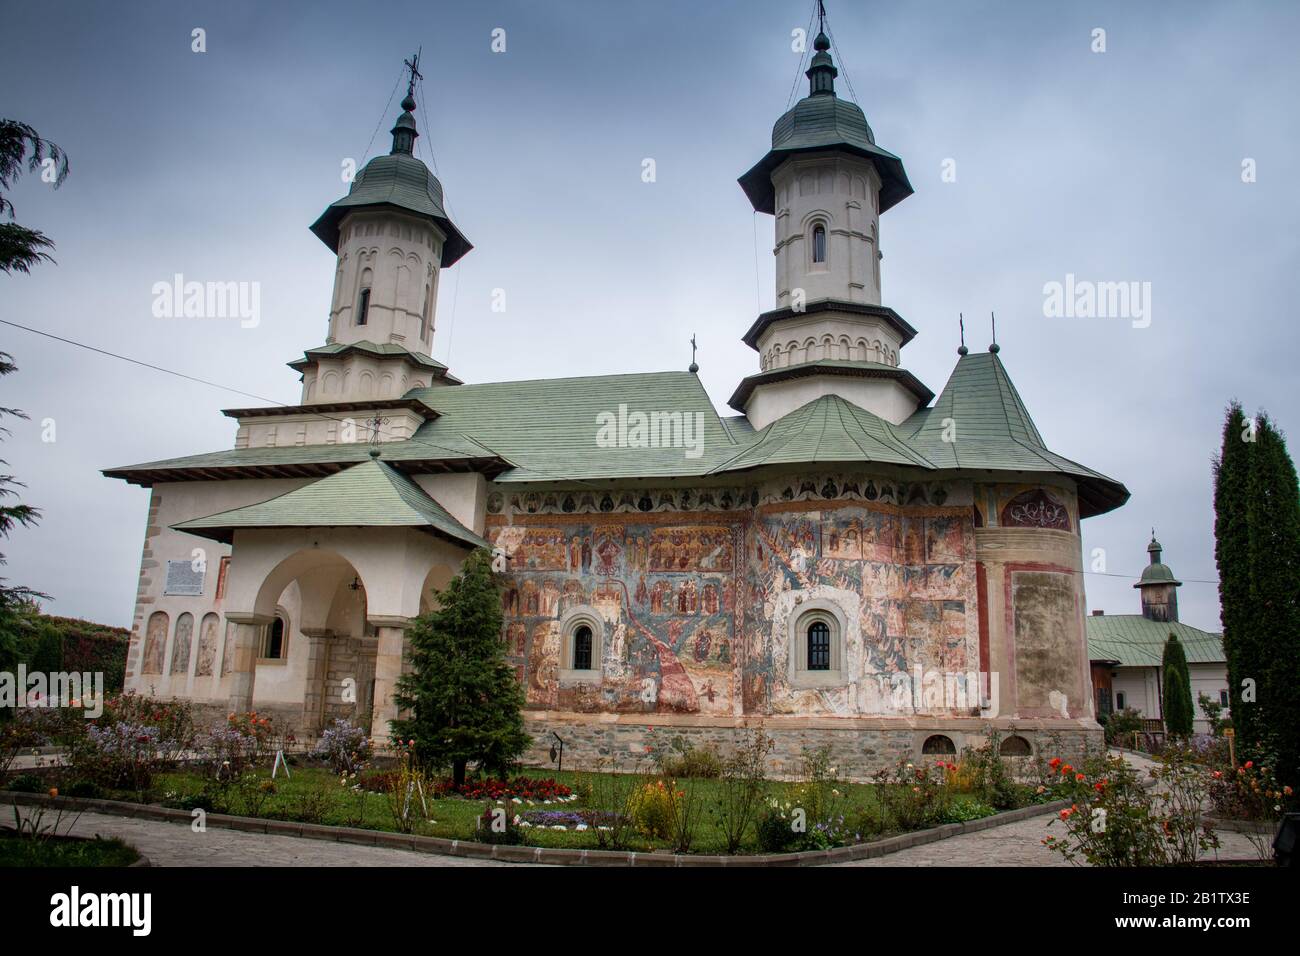 Orthodox monasteries of Bucovina. Rasca monastery is one of the famous painted monasteries of the Bucovina region due to the 16th-century frescos pres Stock Photo